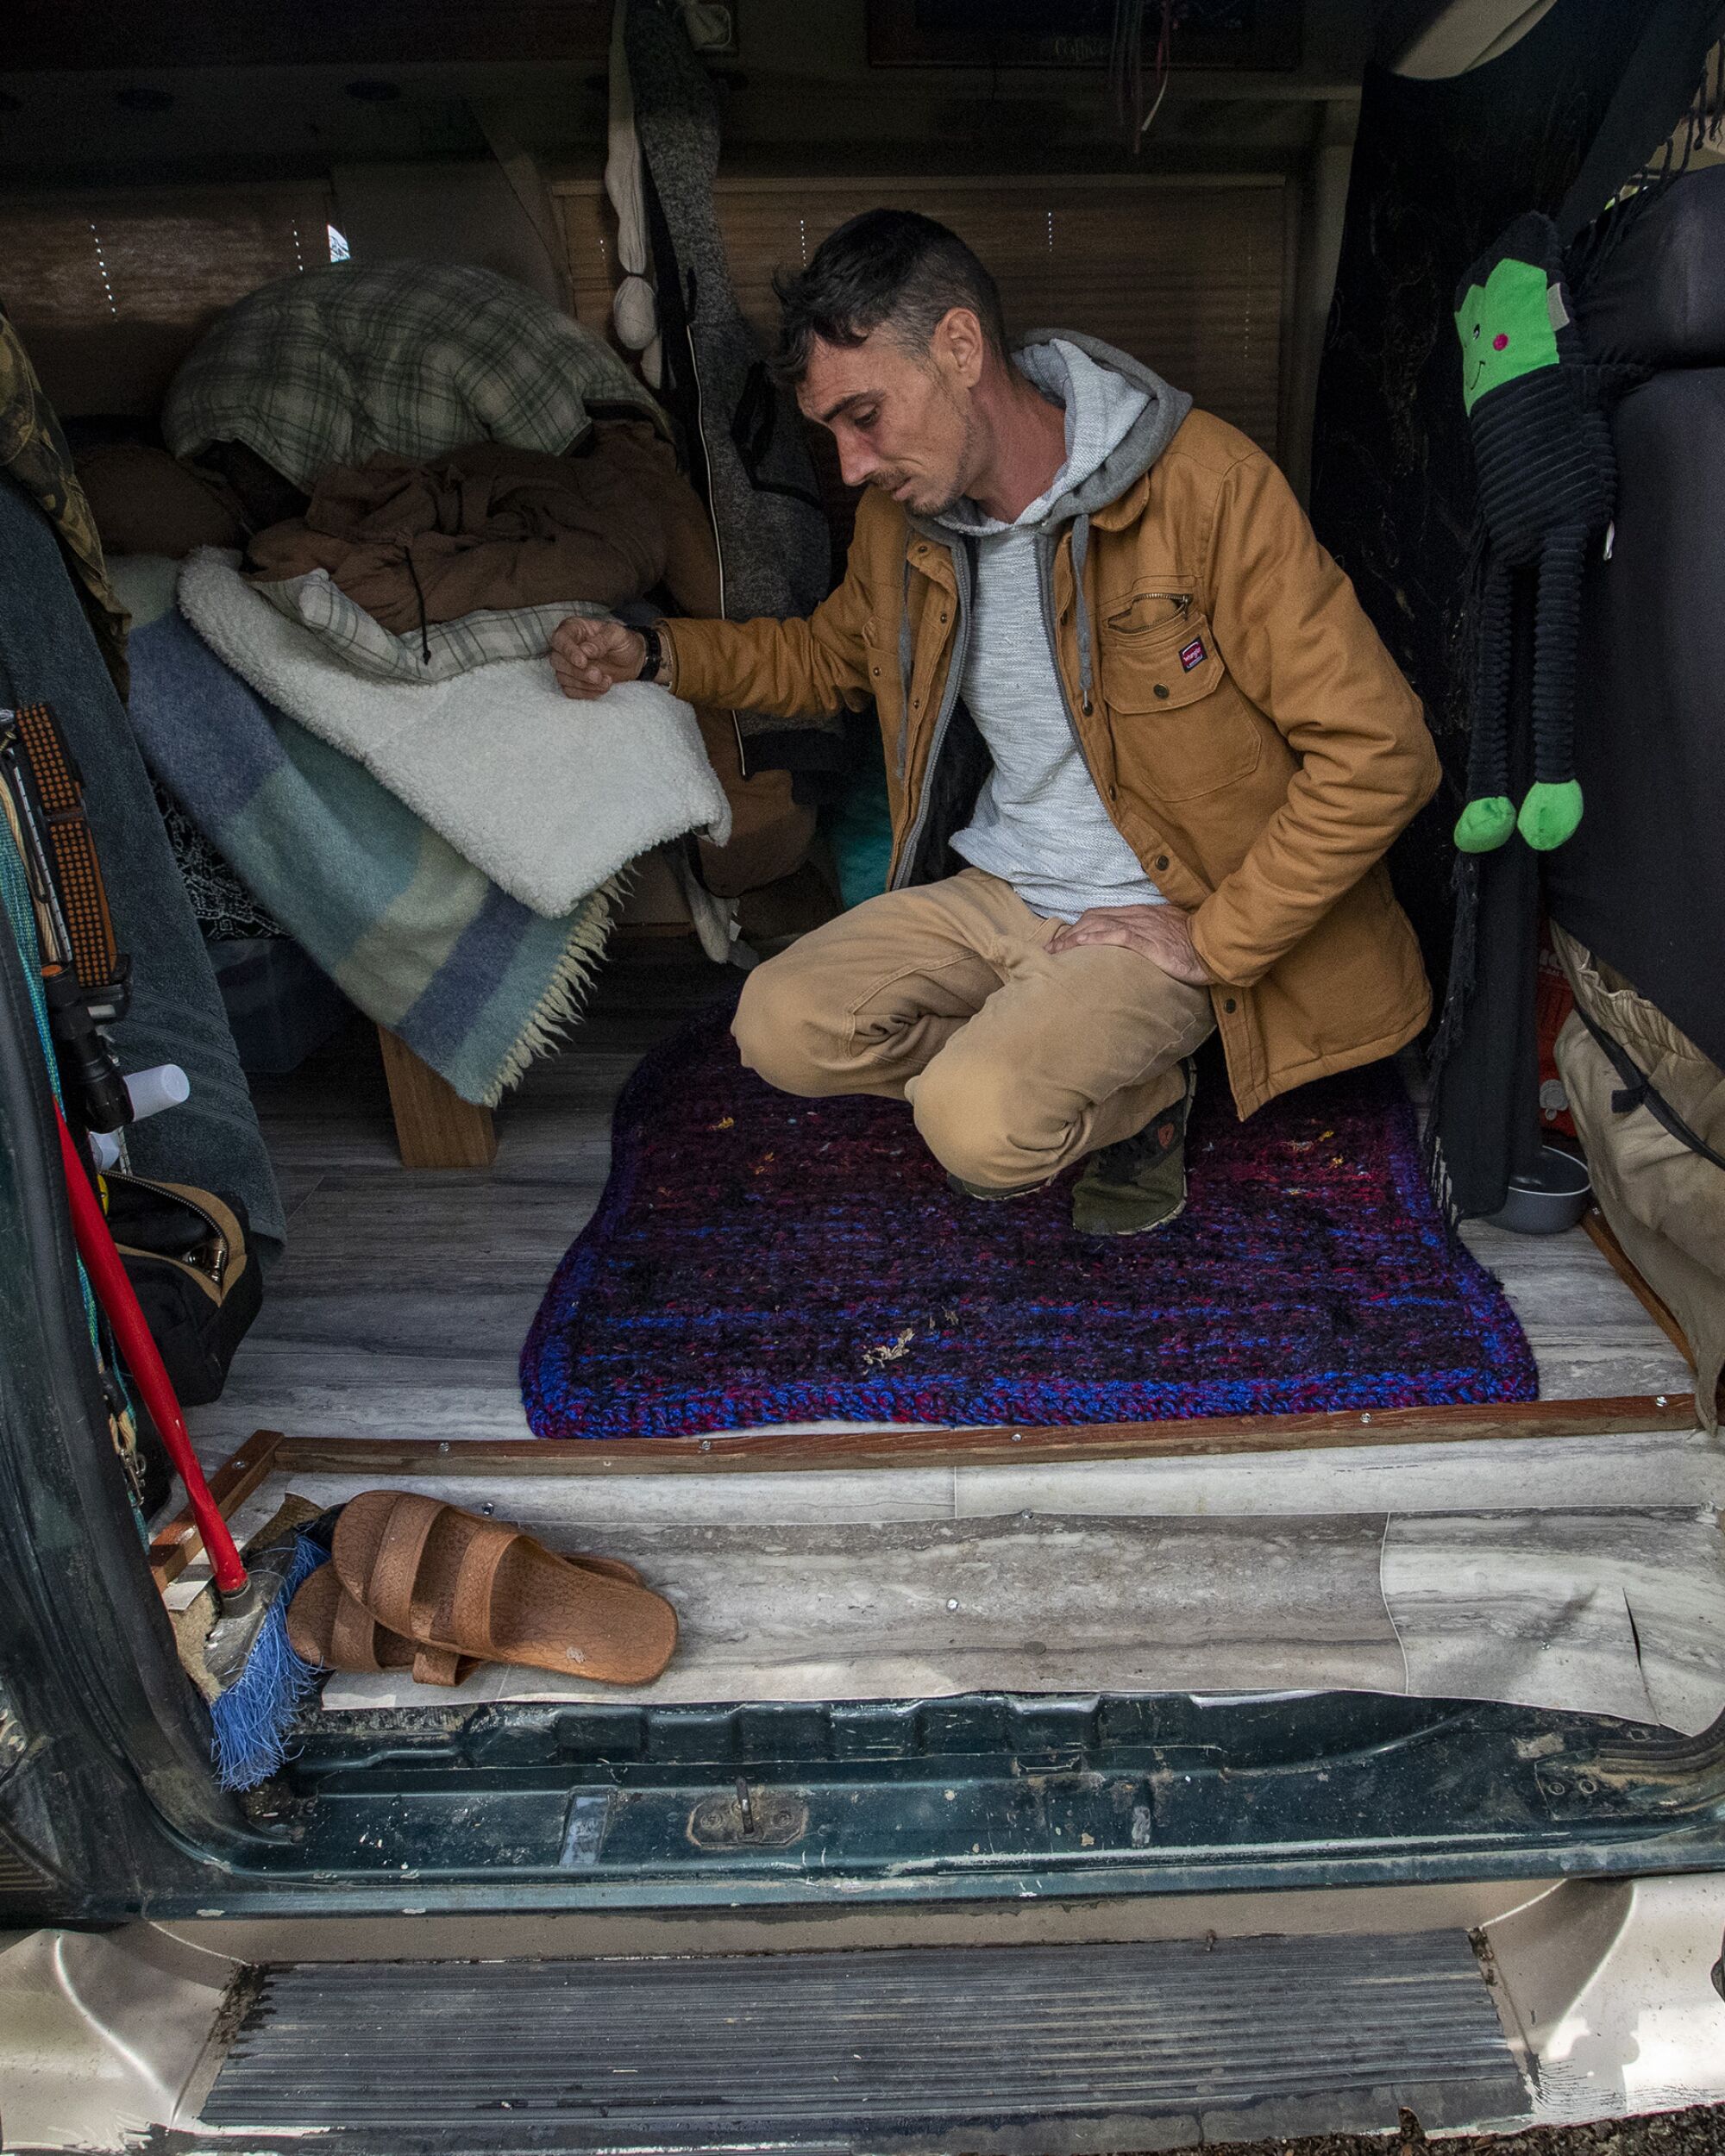 A cannabis worker lives in his van